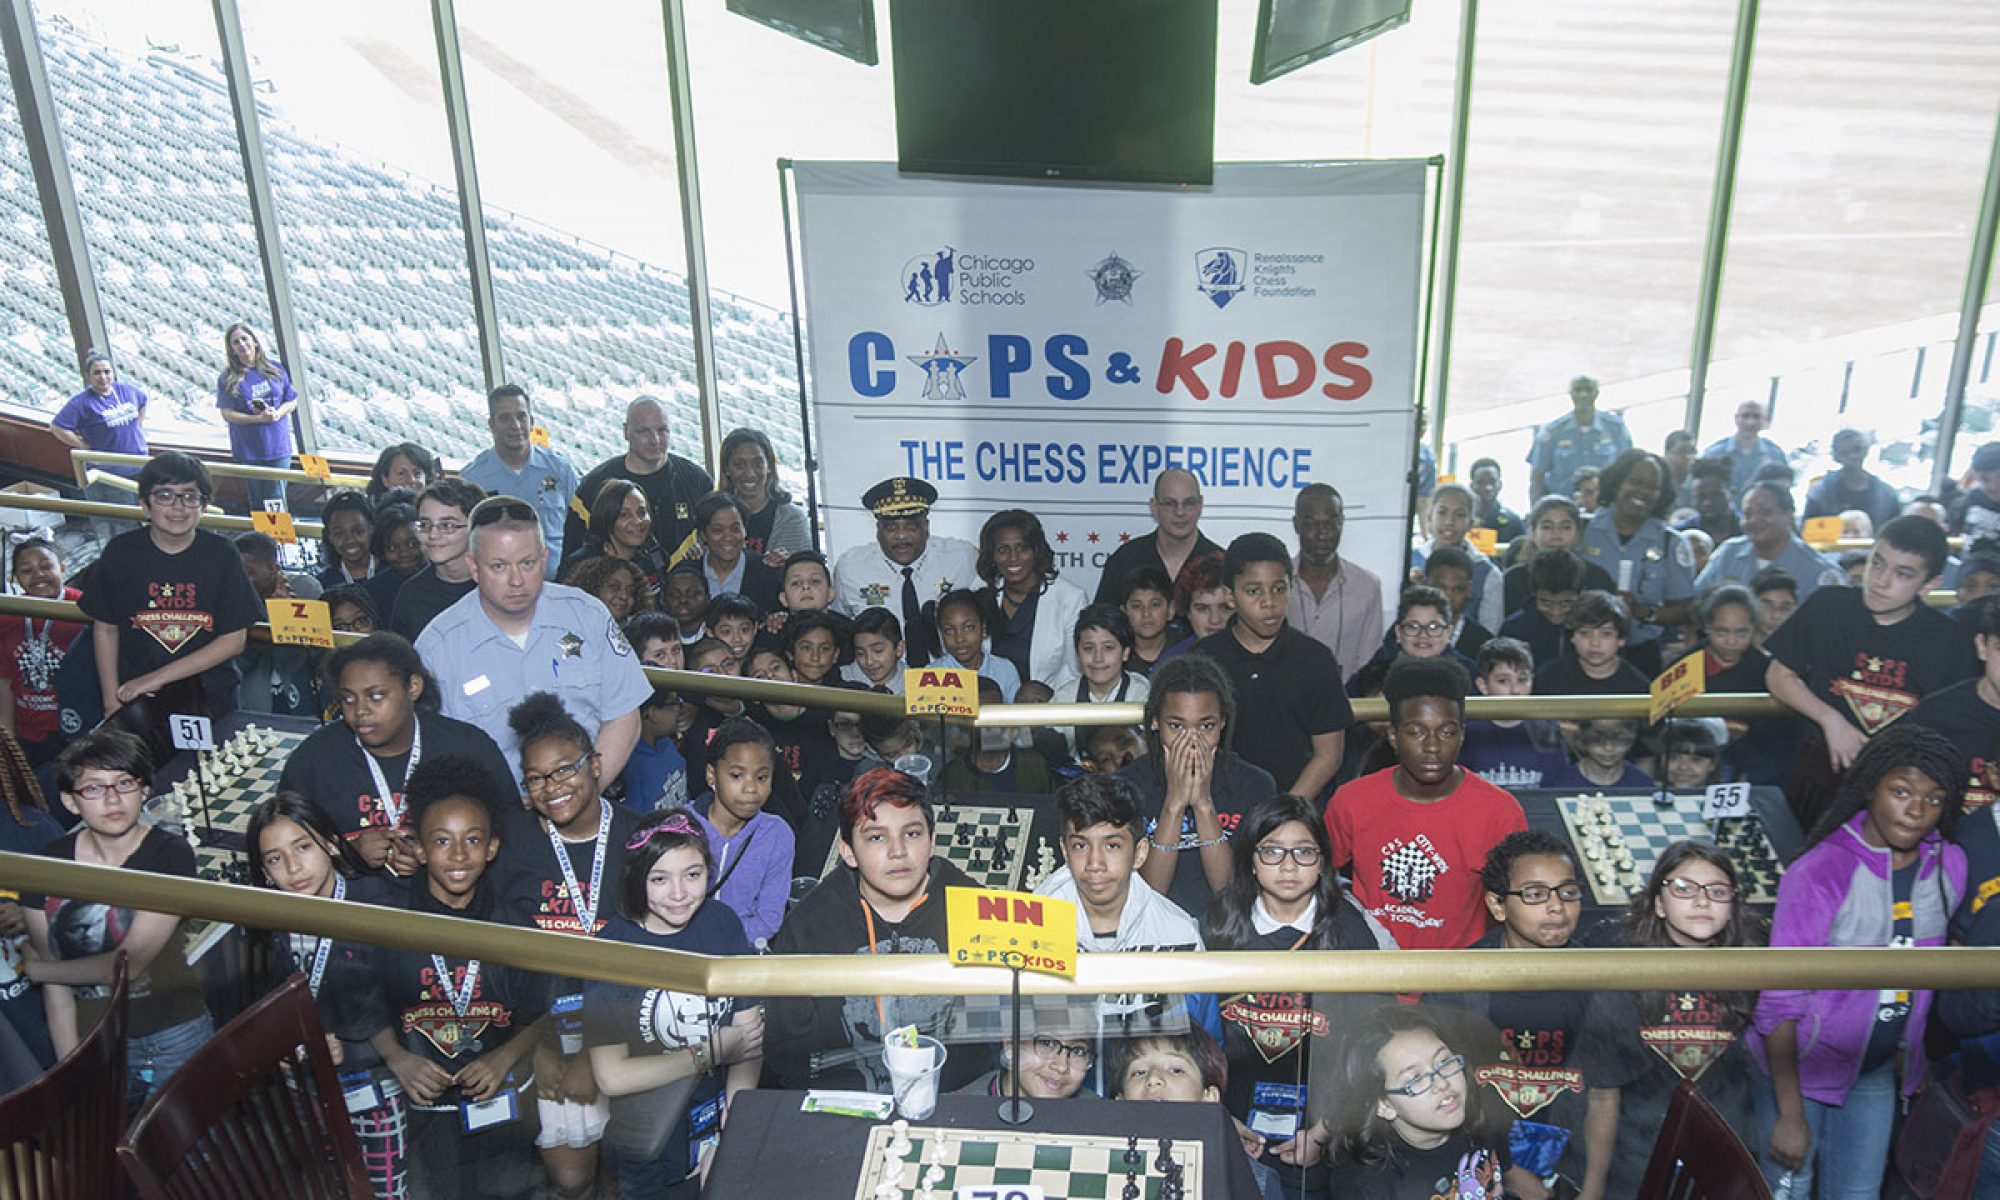 Our Students  Foundation Chess Academy